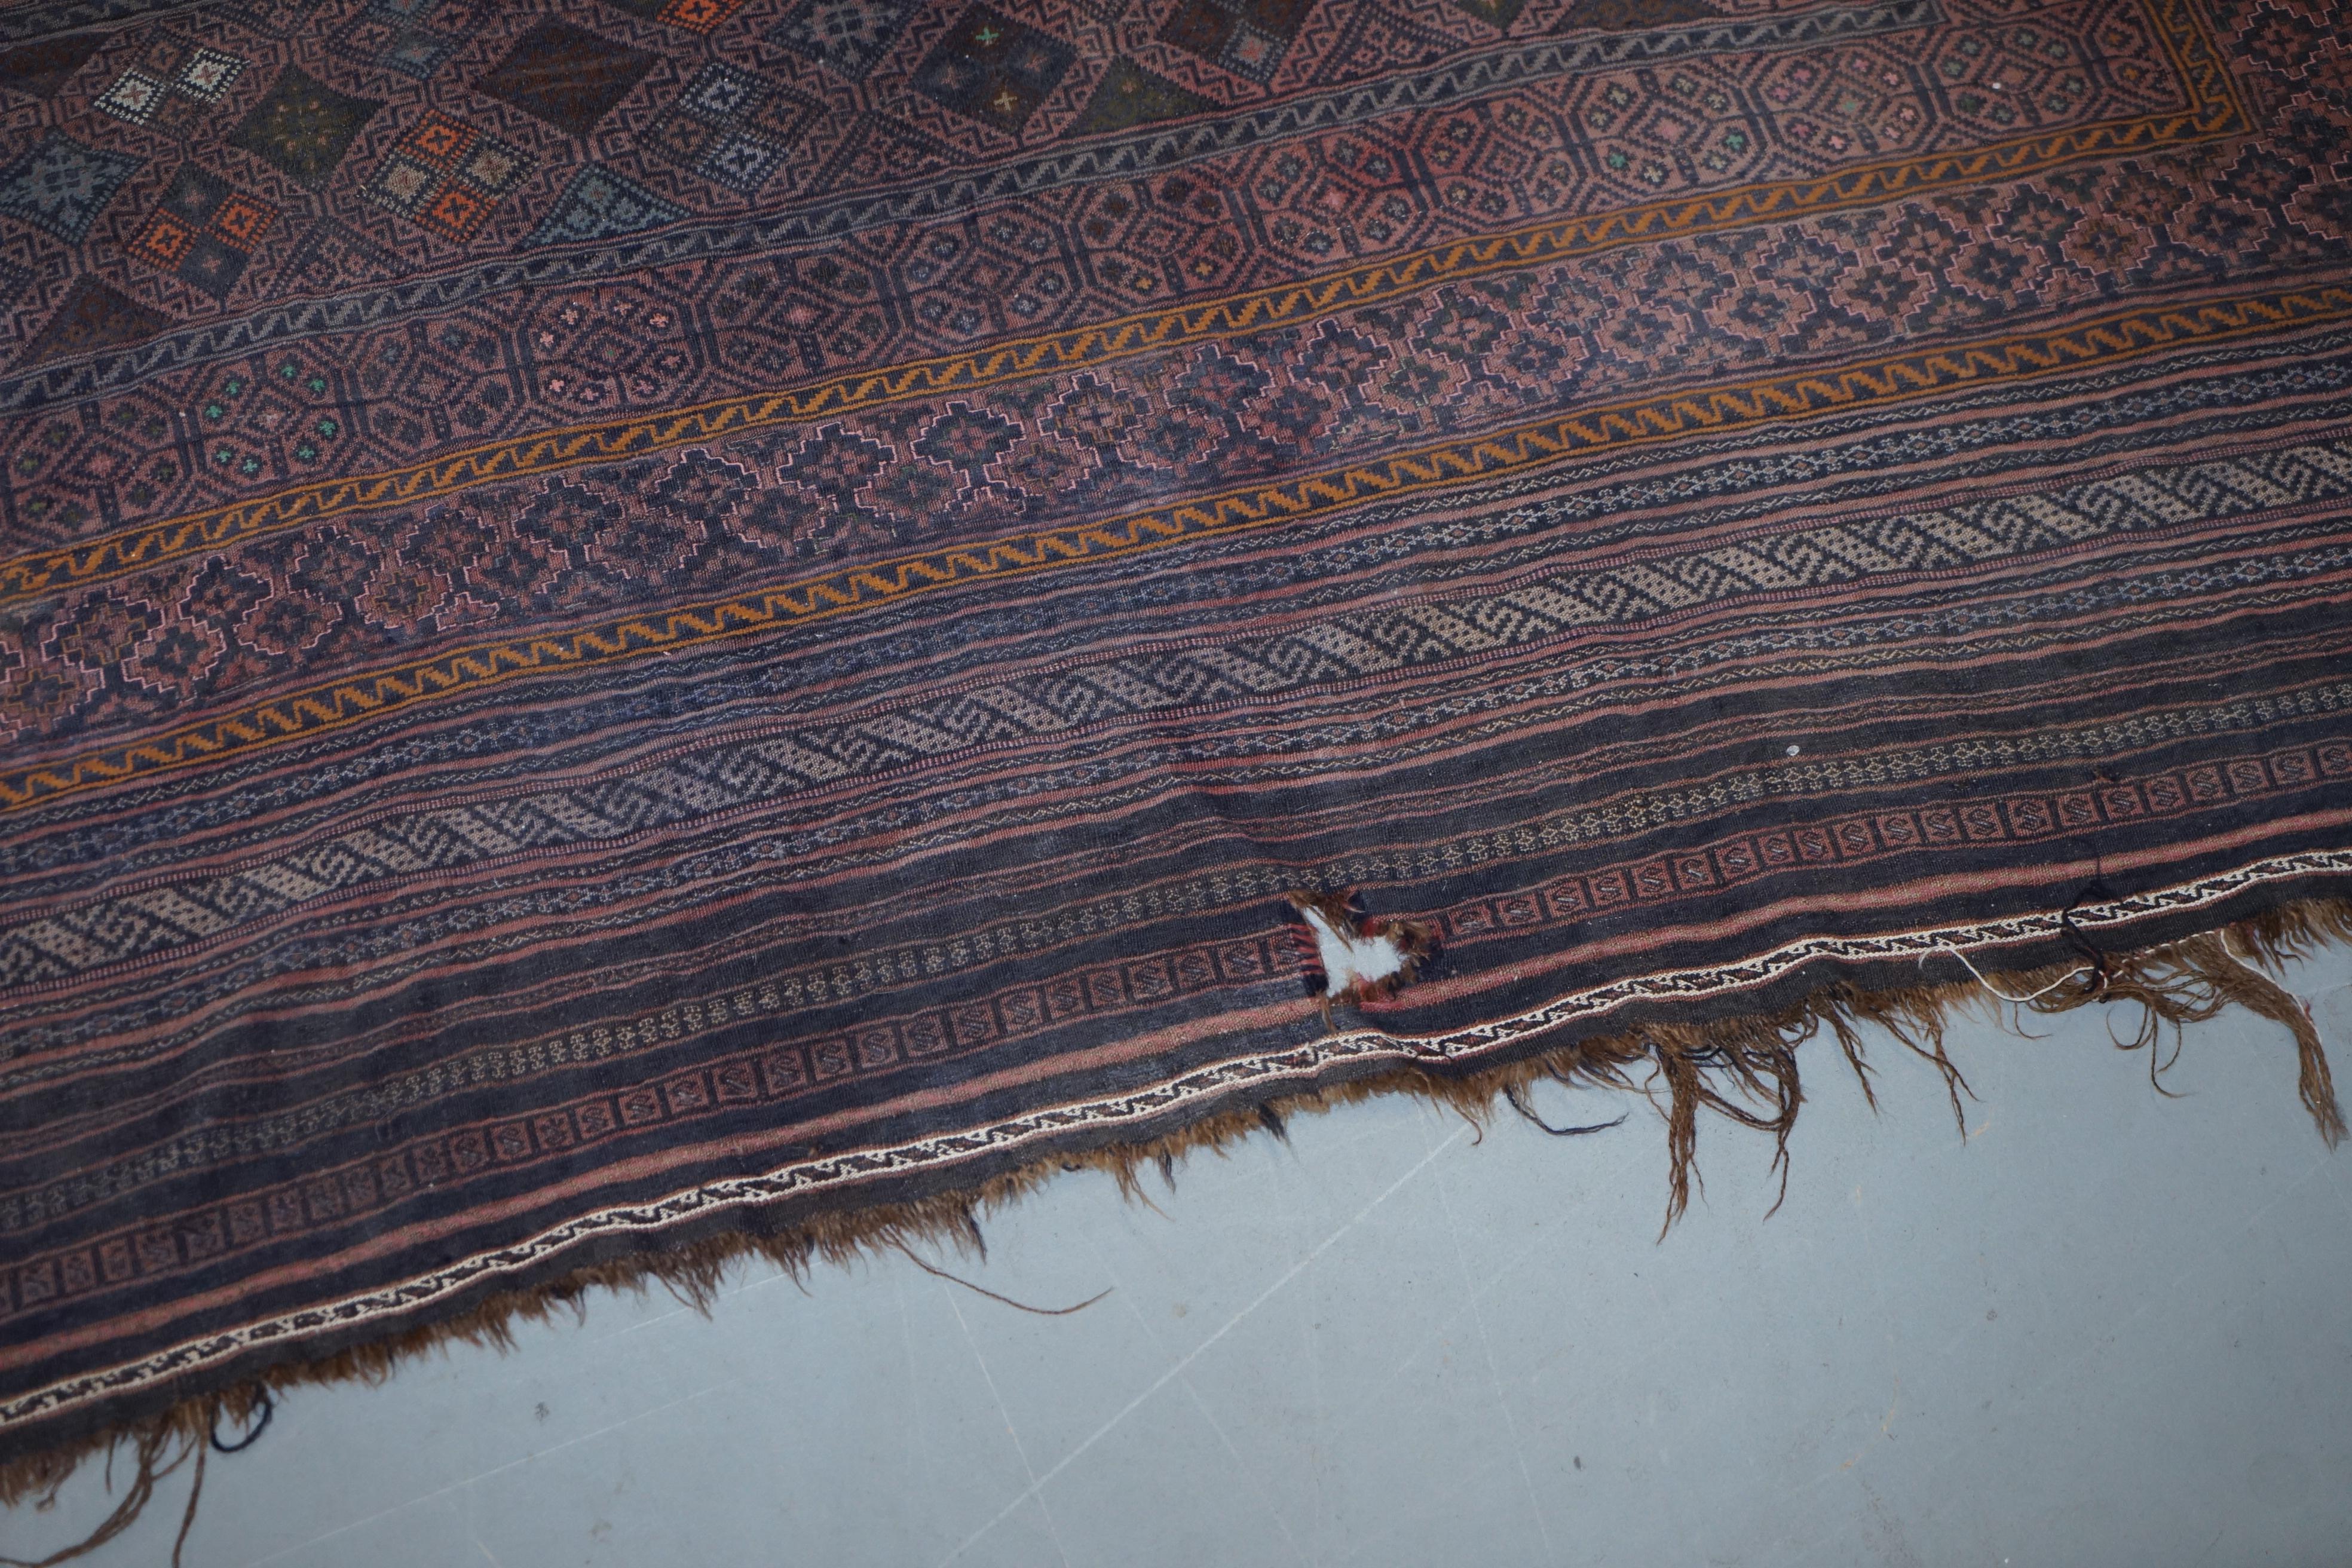 Victorian Very Old Worn Antique Kilim Large Floor Rug Hand Knotted and Woven